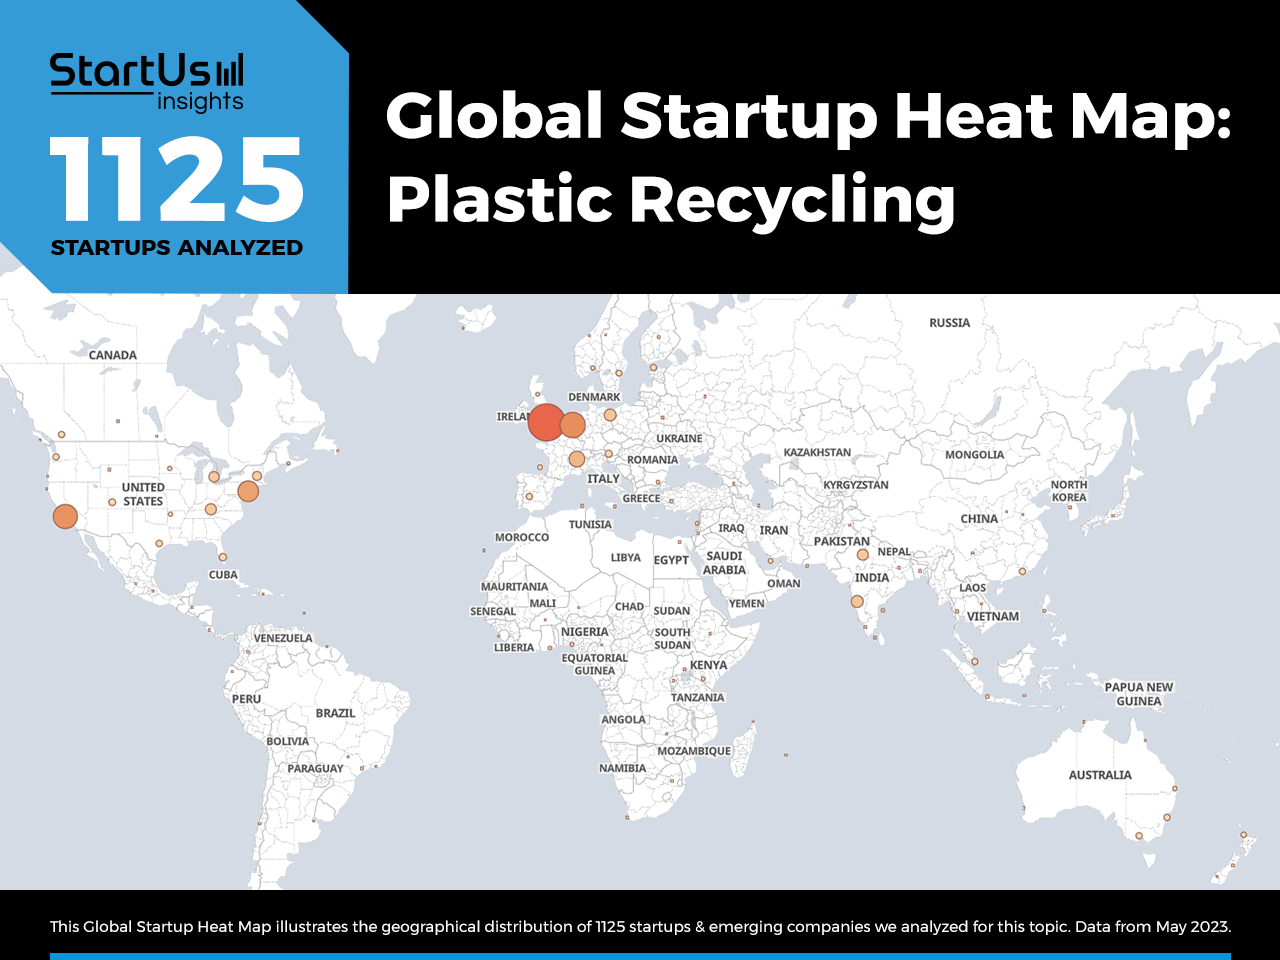 Plastic-Recycling-Heat-Map-StartUs-Insights-noresize